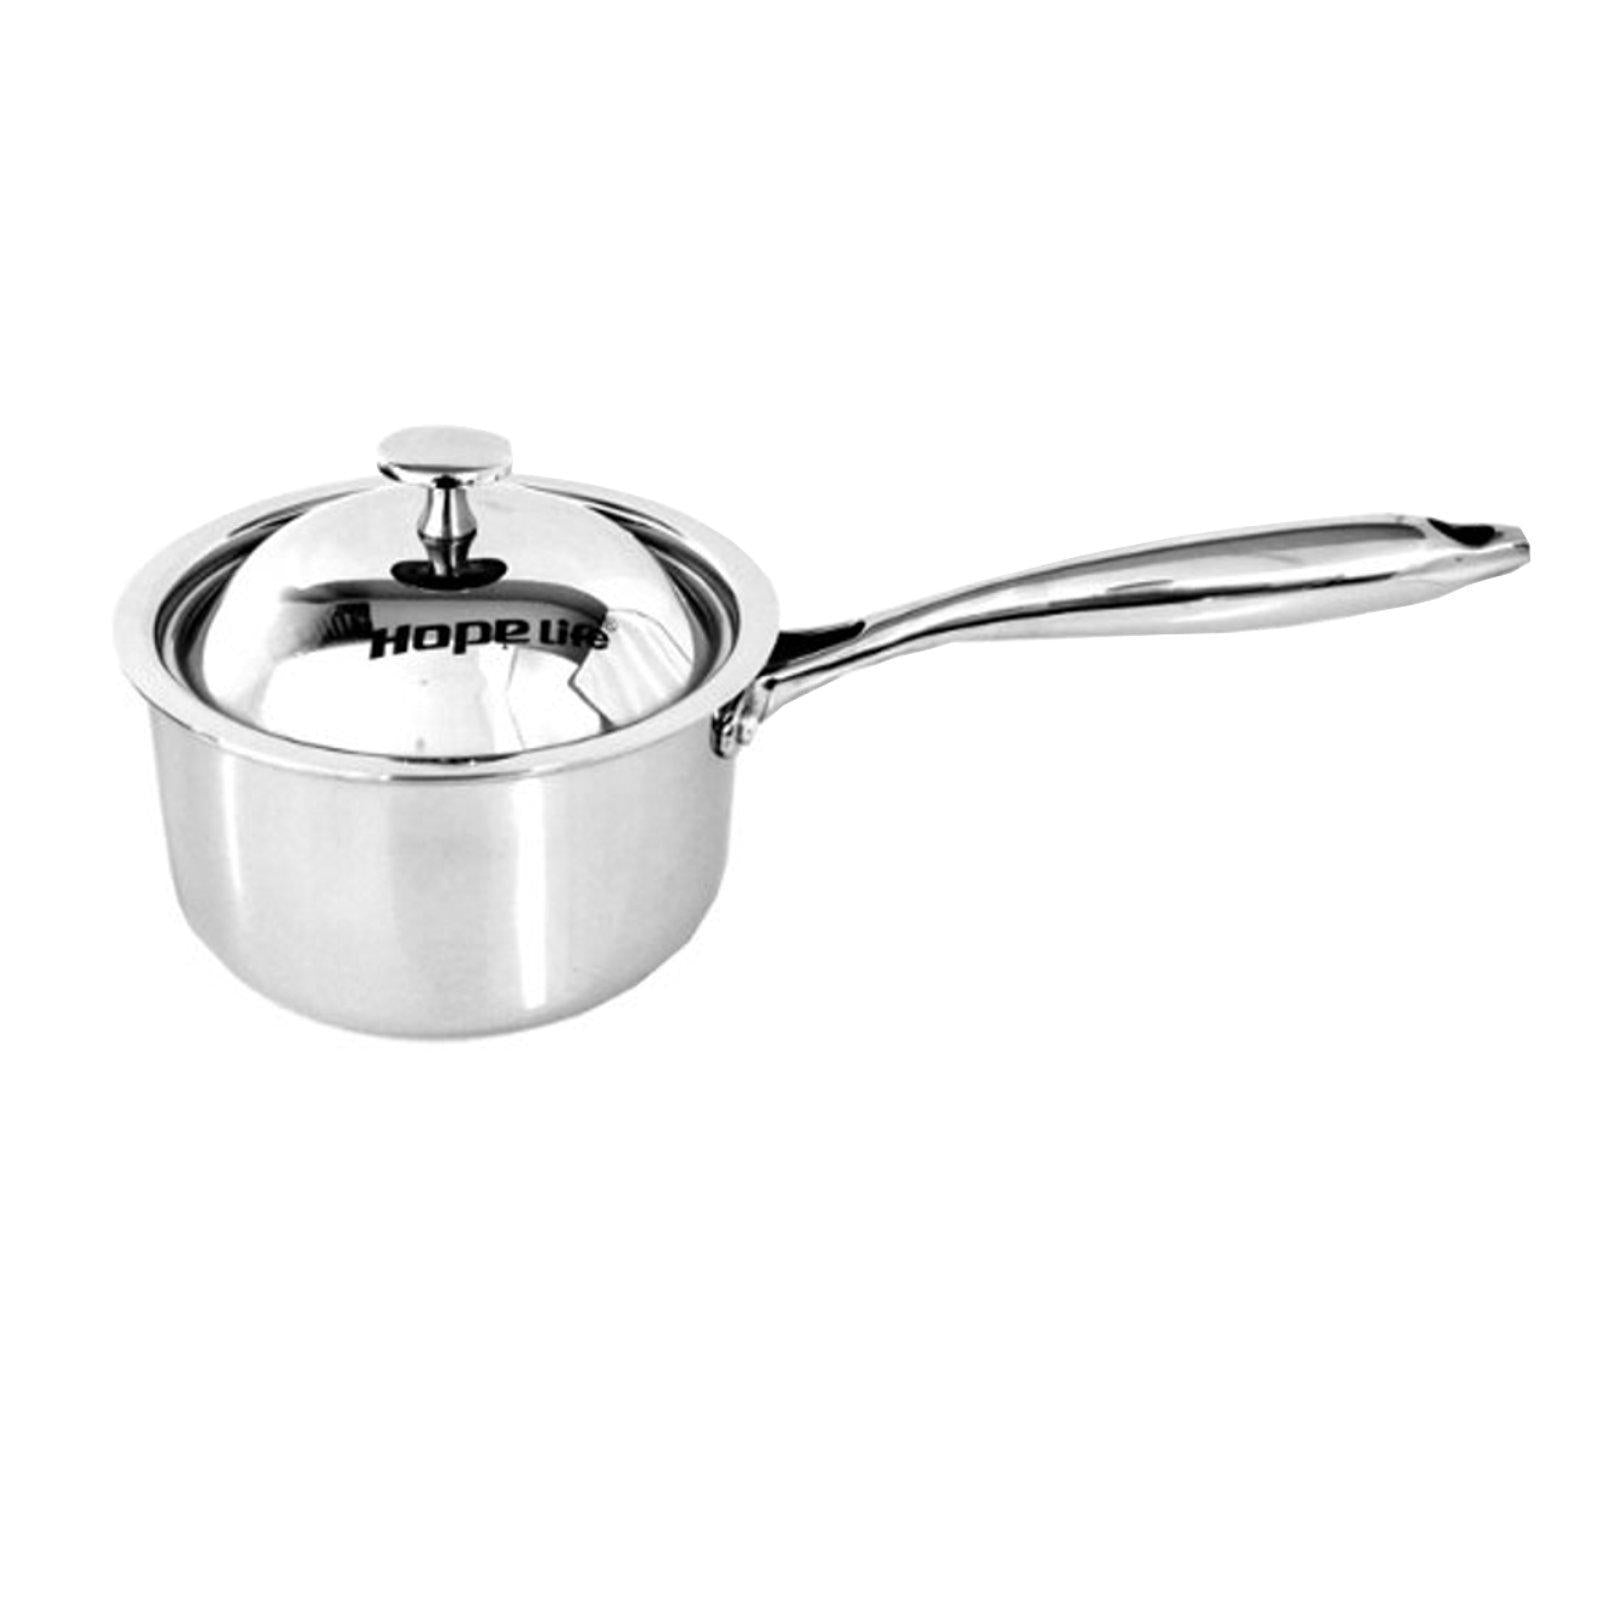 18 CM Stainless Steel 3-Ply Saucepan - Induction Compatible-Stainless Steel Cookware-Chef's Quality Cookware